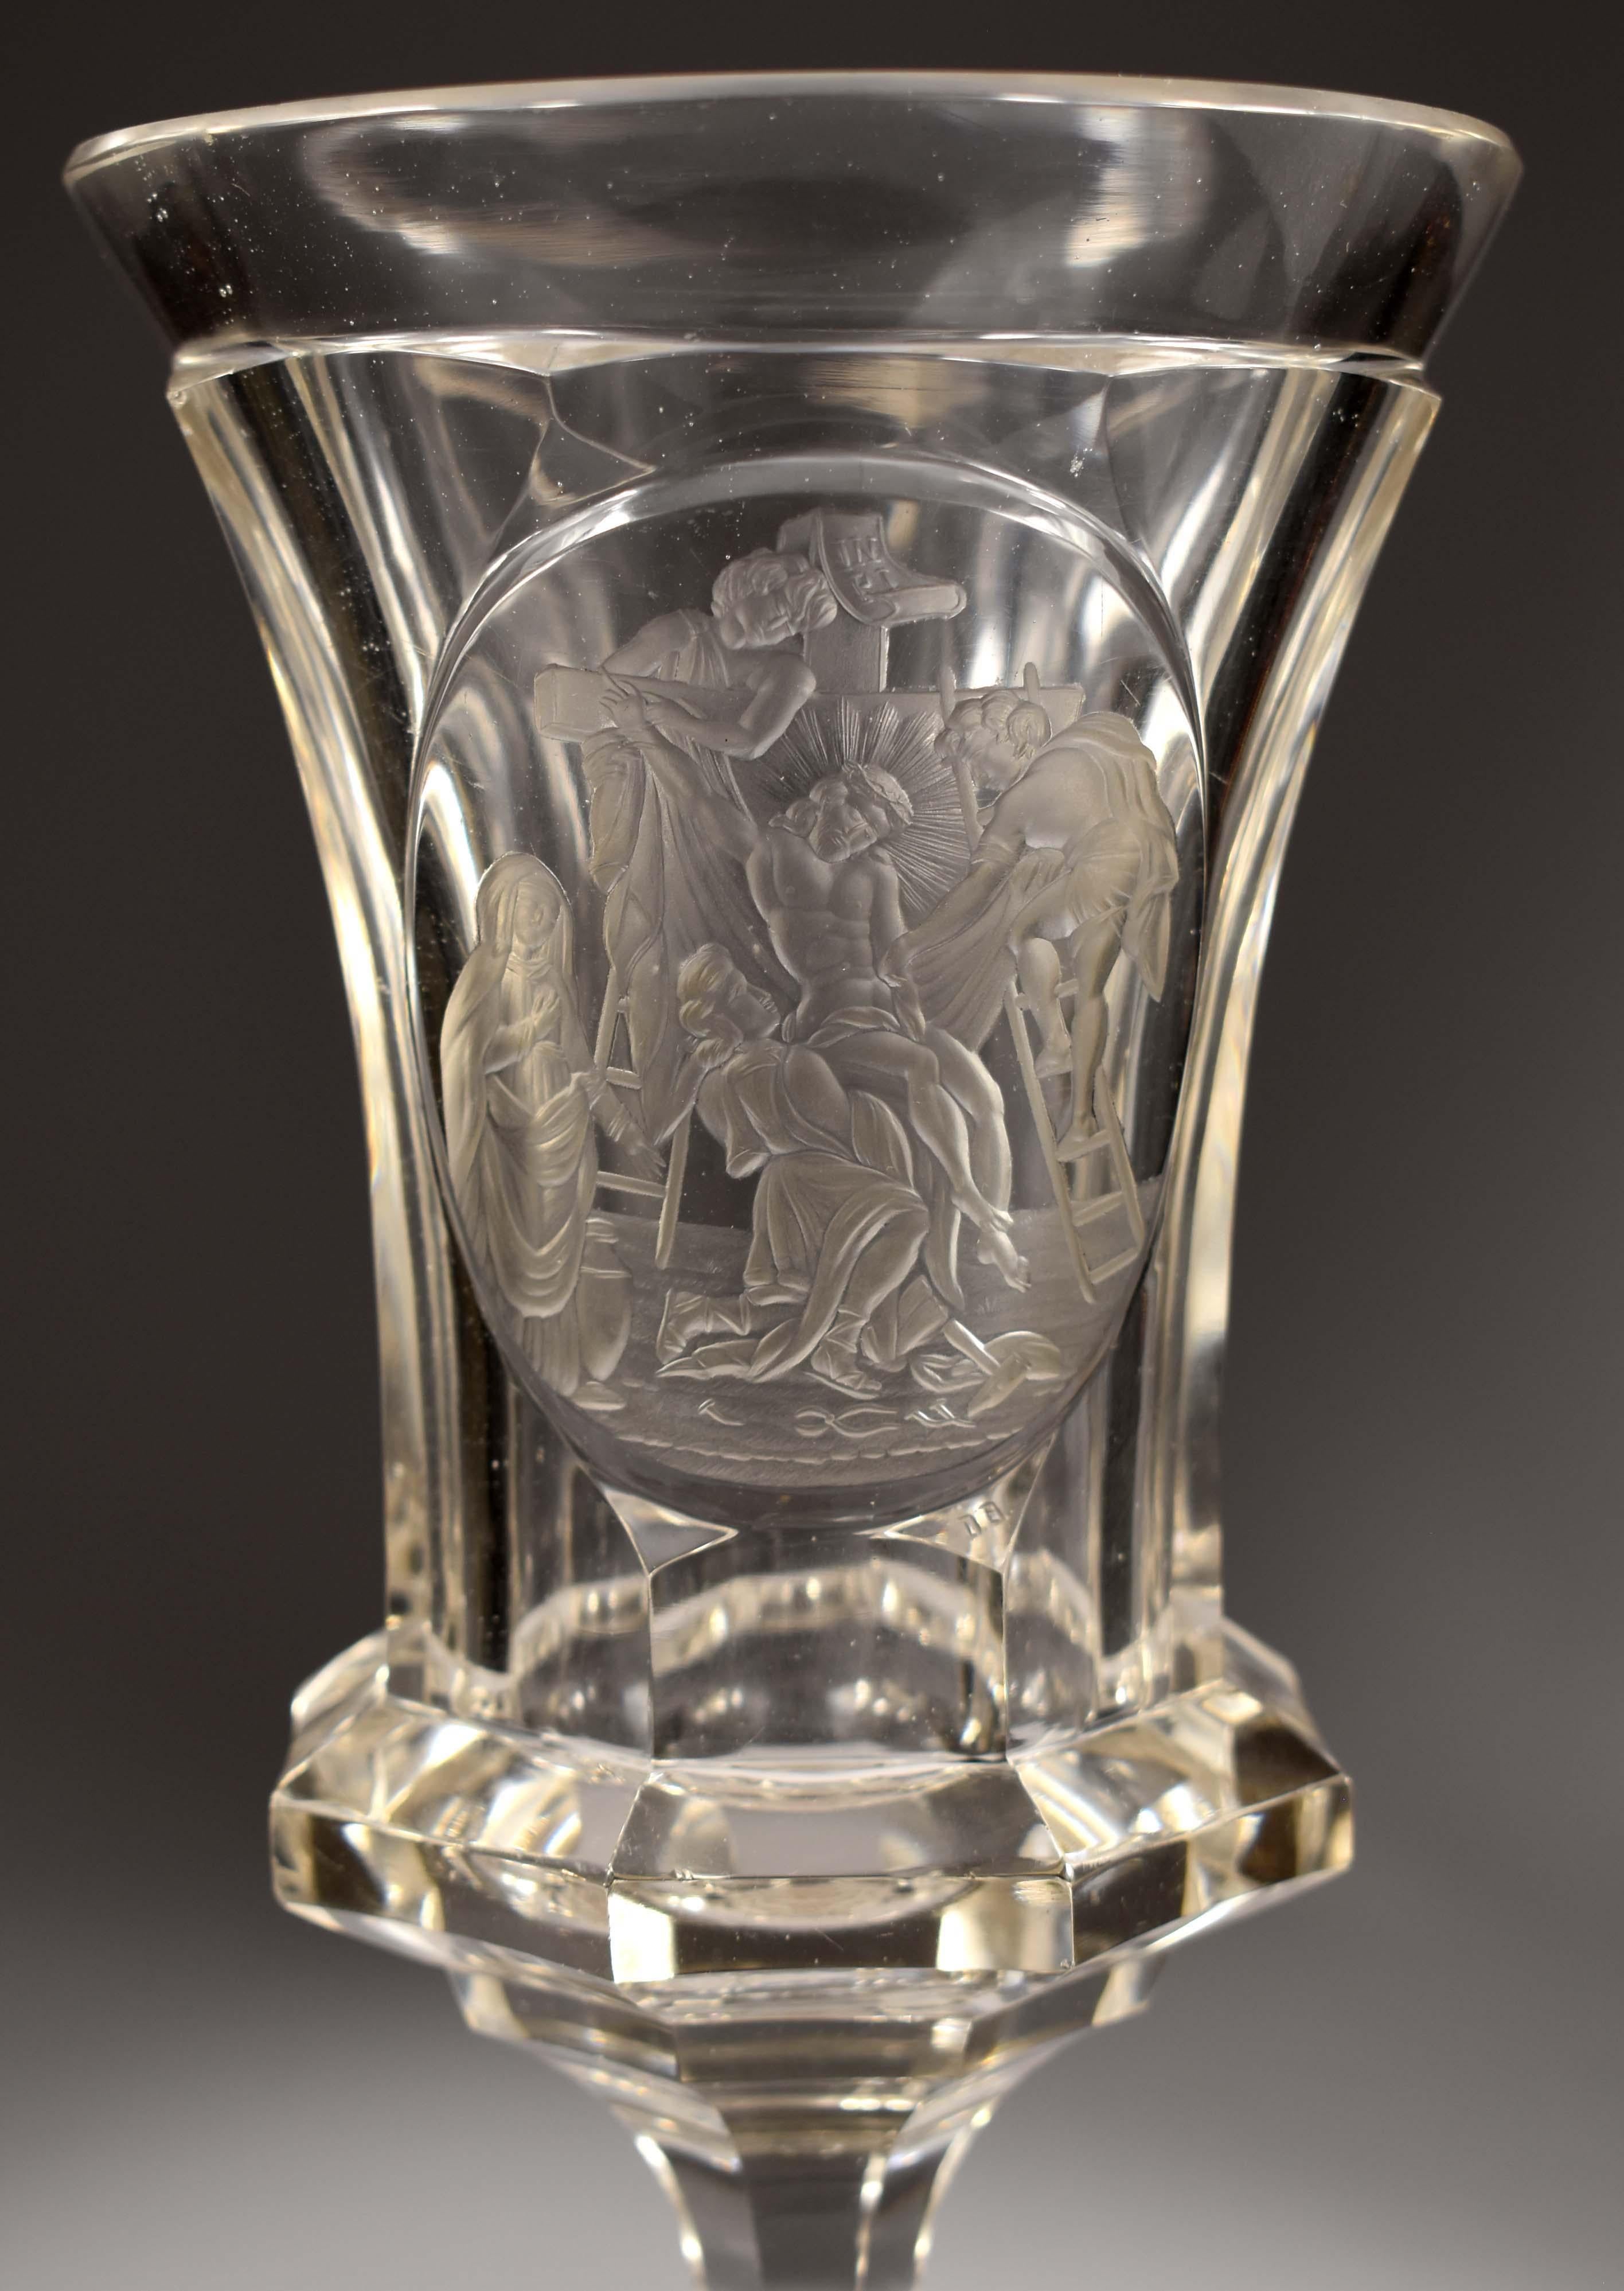 Czech Unique Antique Engraved Goblet -The Descent from the Cross -19th Century For Sale